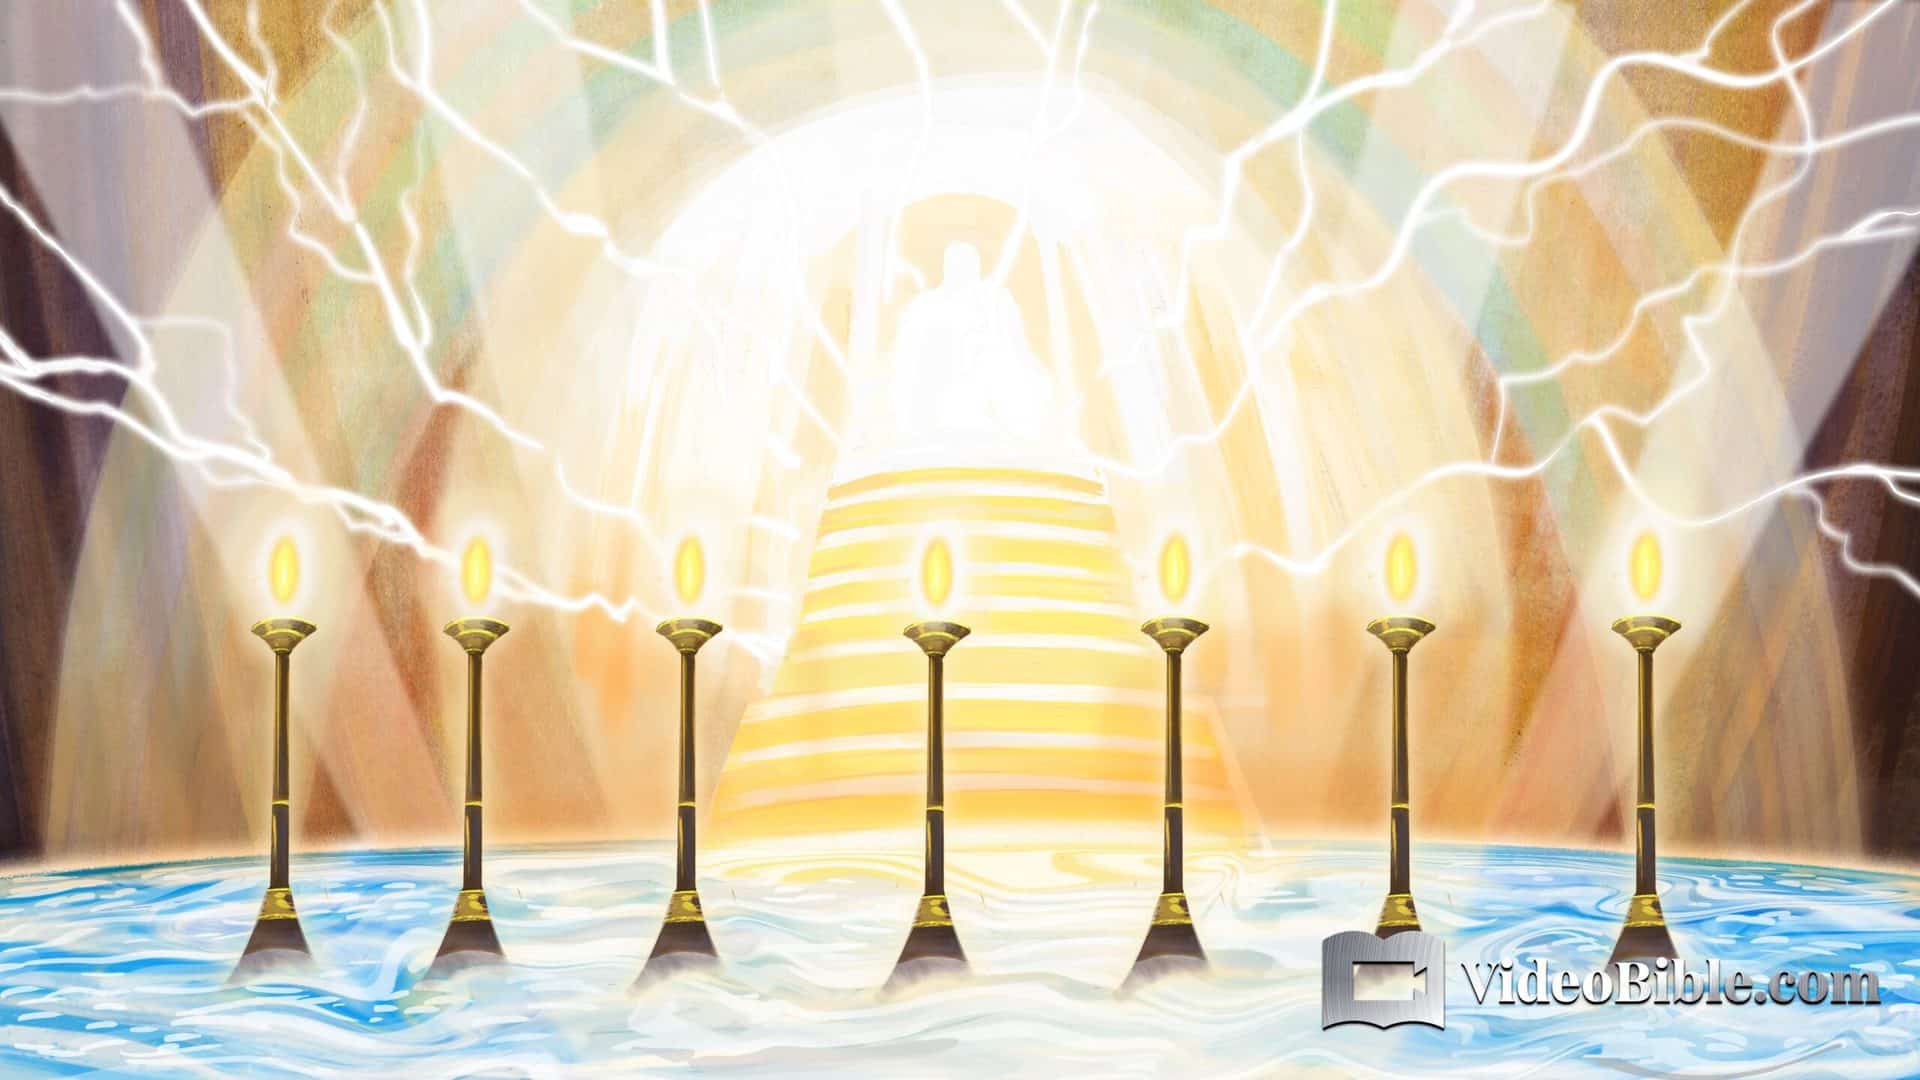 God the father on the throne lightning bolts rainbow sea of crystals and 7 golden lamp stands which are the 7 spirits of God